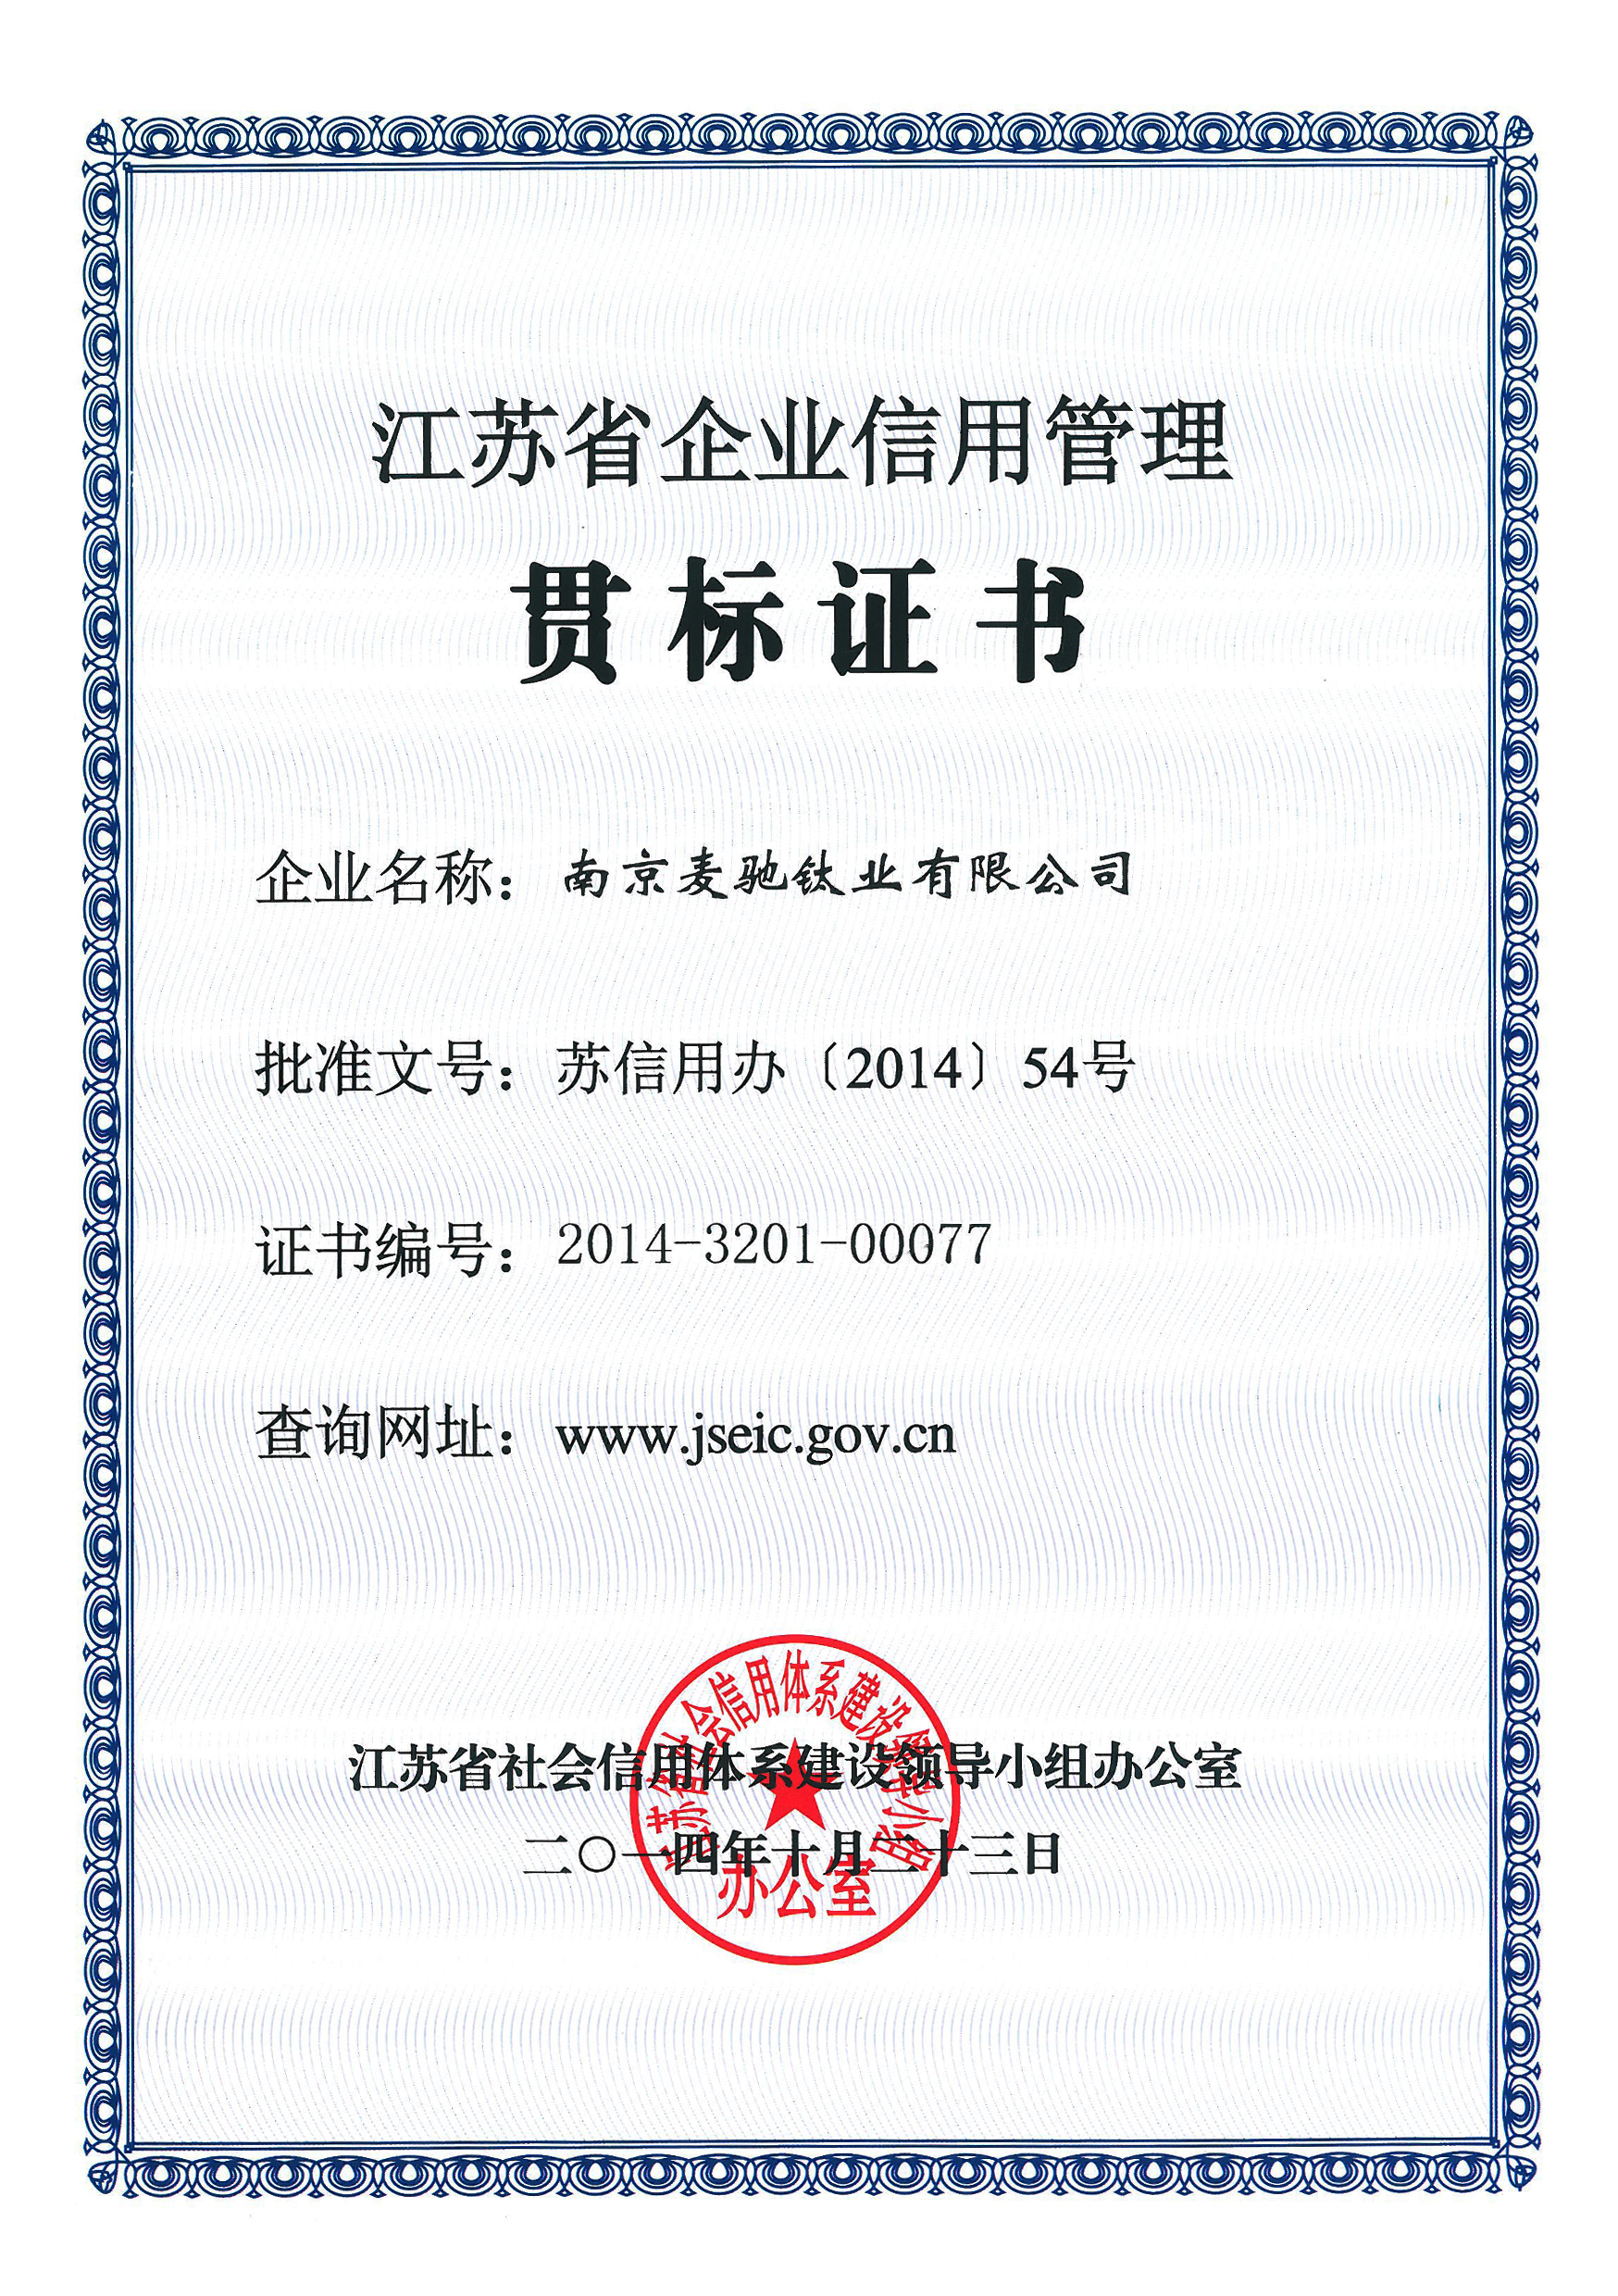 Implementation certificate